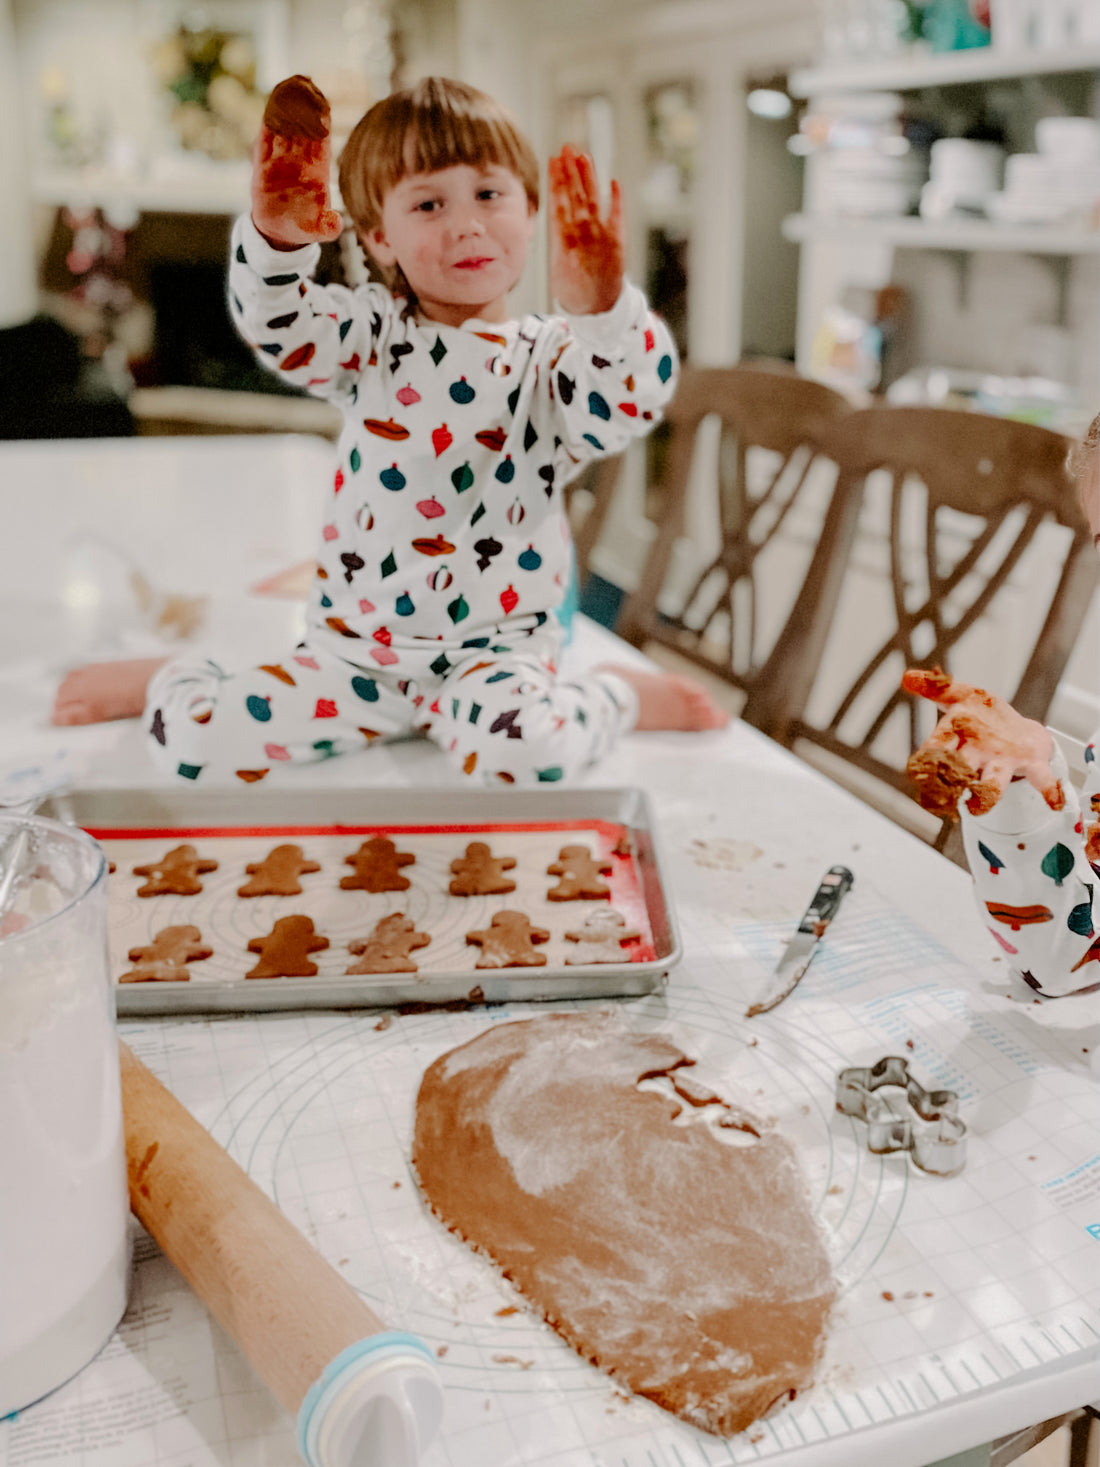 Christmas Activity To Keep Your Little Ones Entertained (And Keep You Sane!)